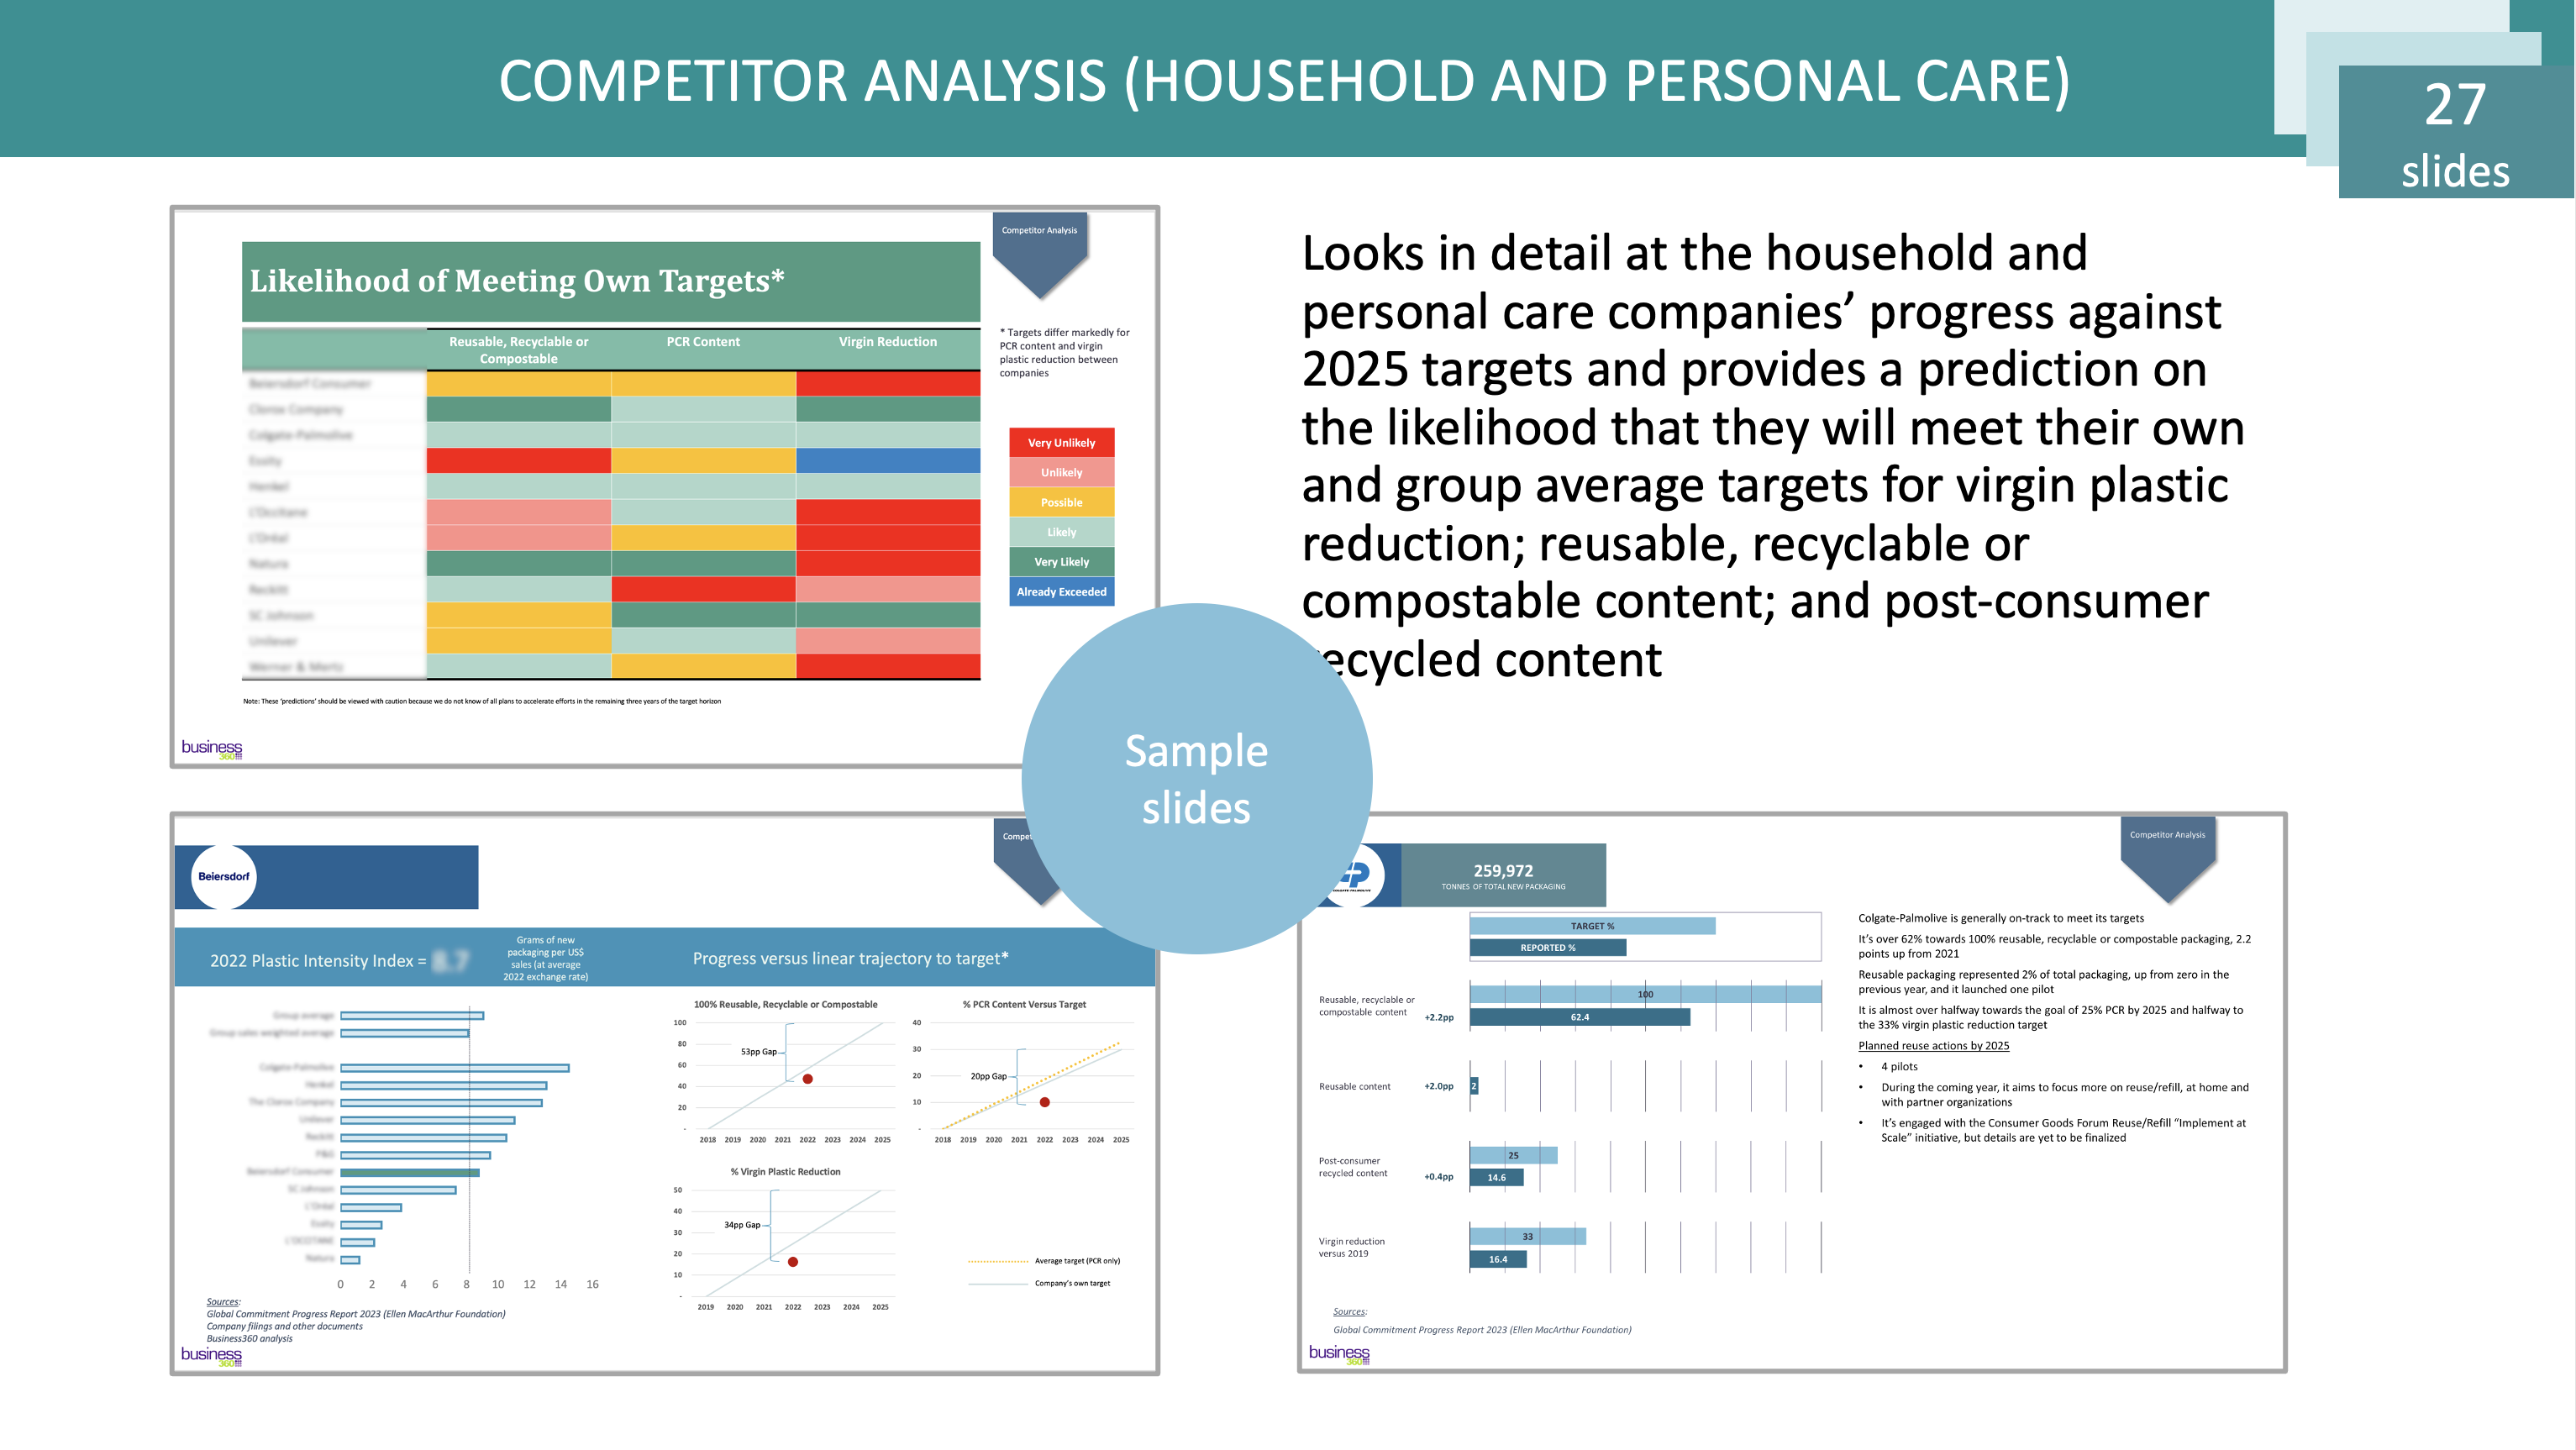 COMPETITOR ANALYSIS (HOUSEHOLD AND PERSONAL CARE)